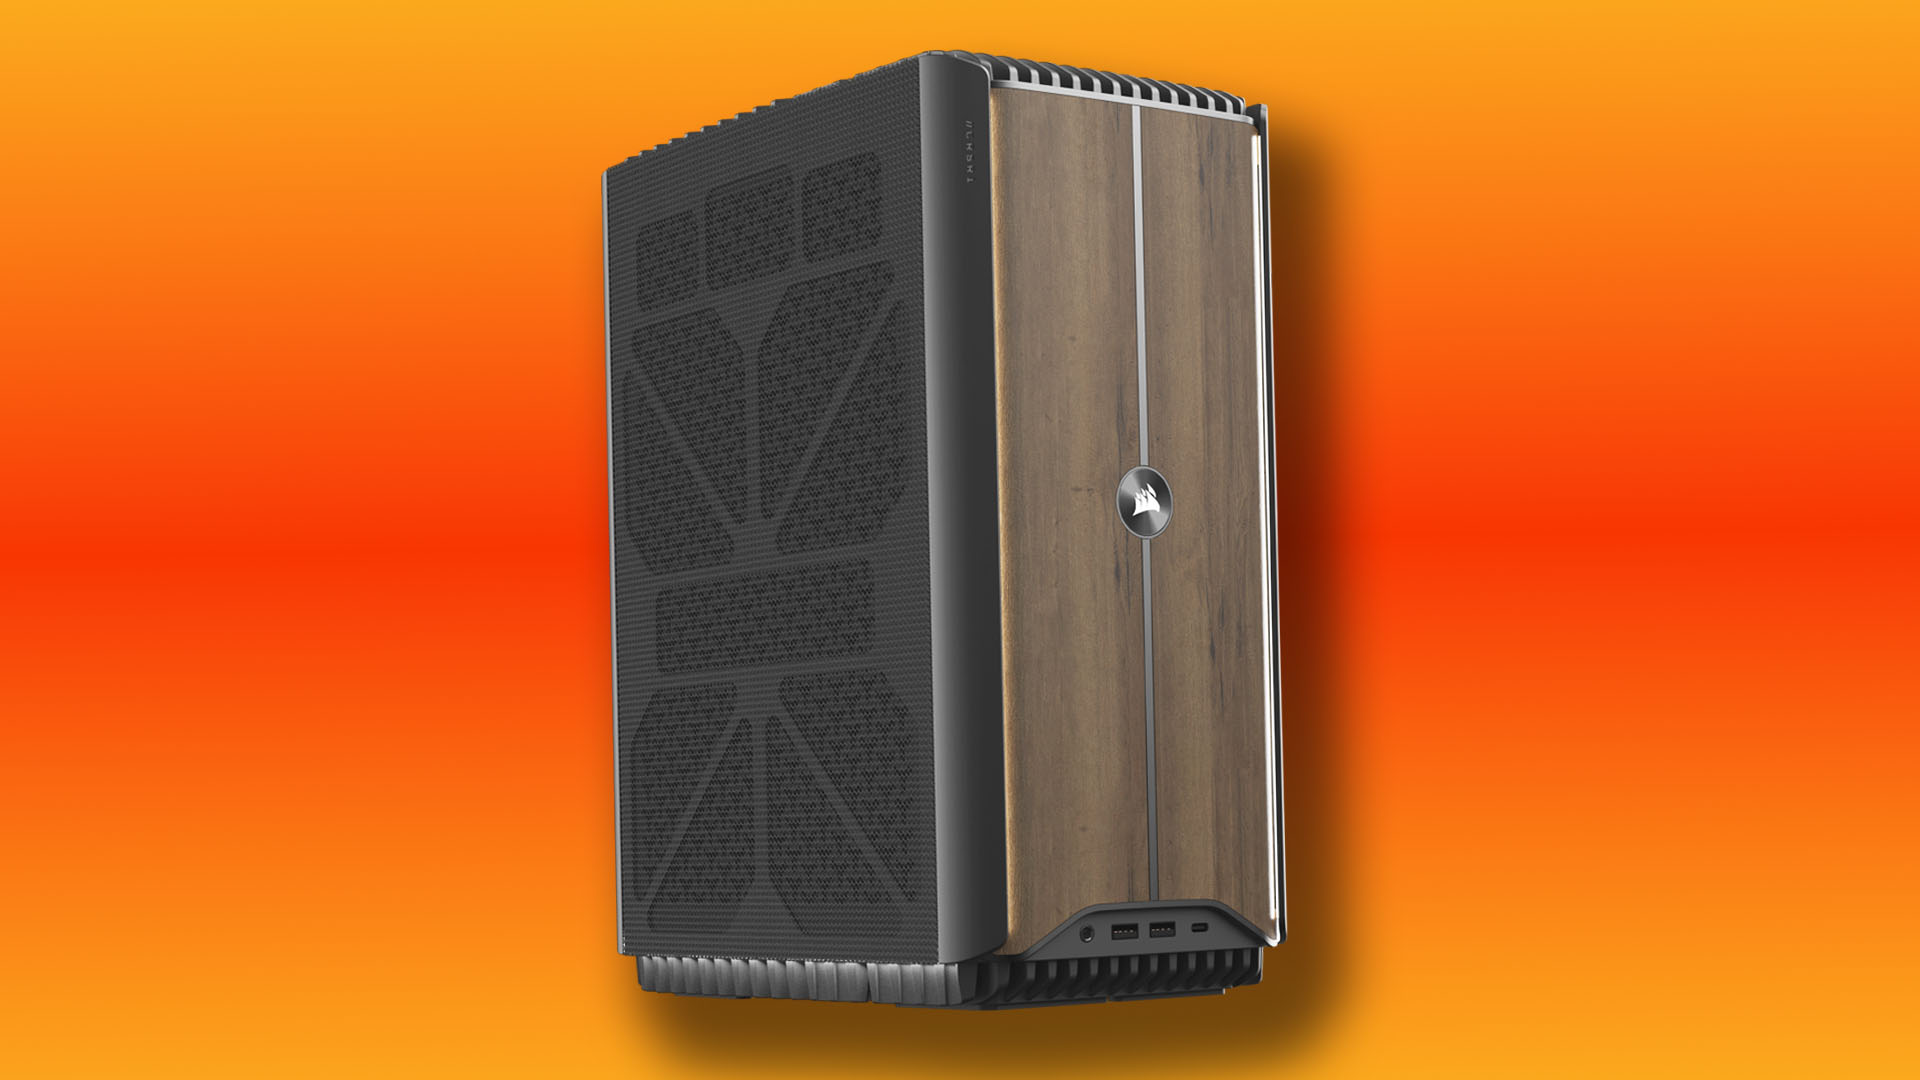 Corsair's new mini gaming PC has a wood front and an amazing spec